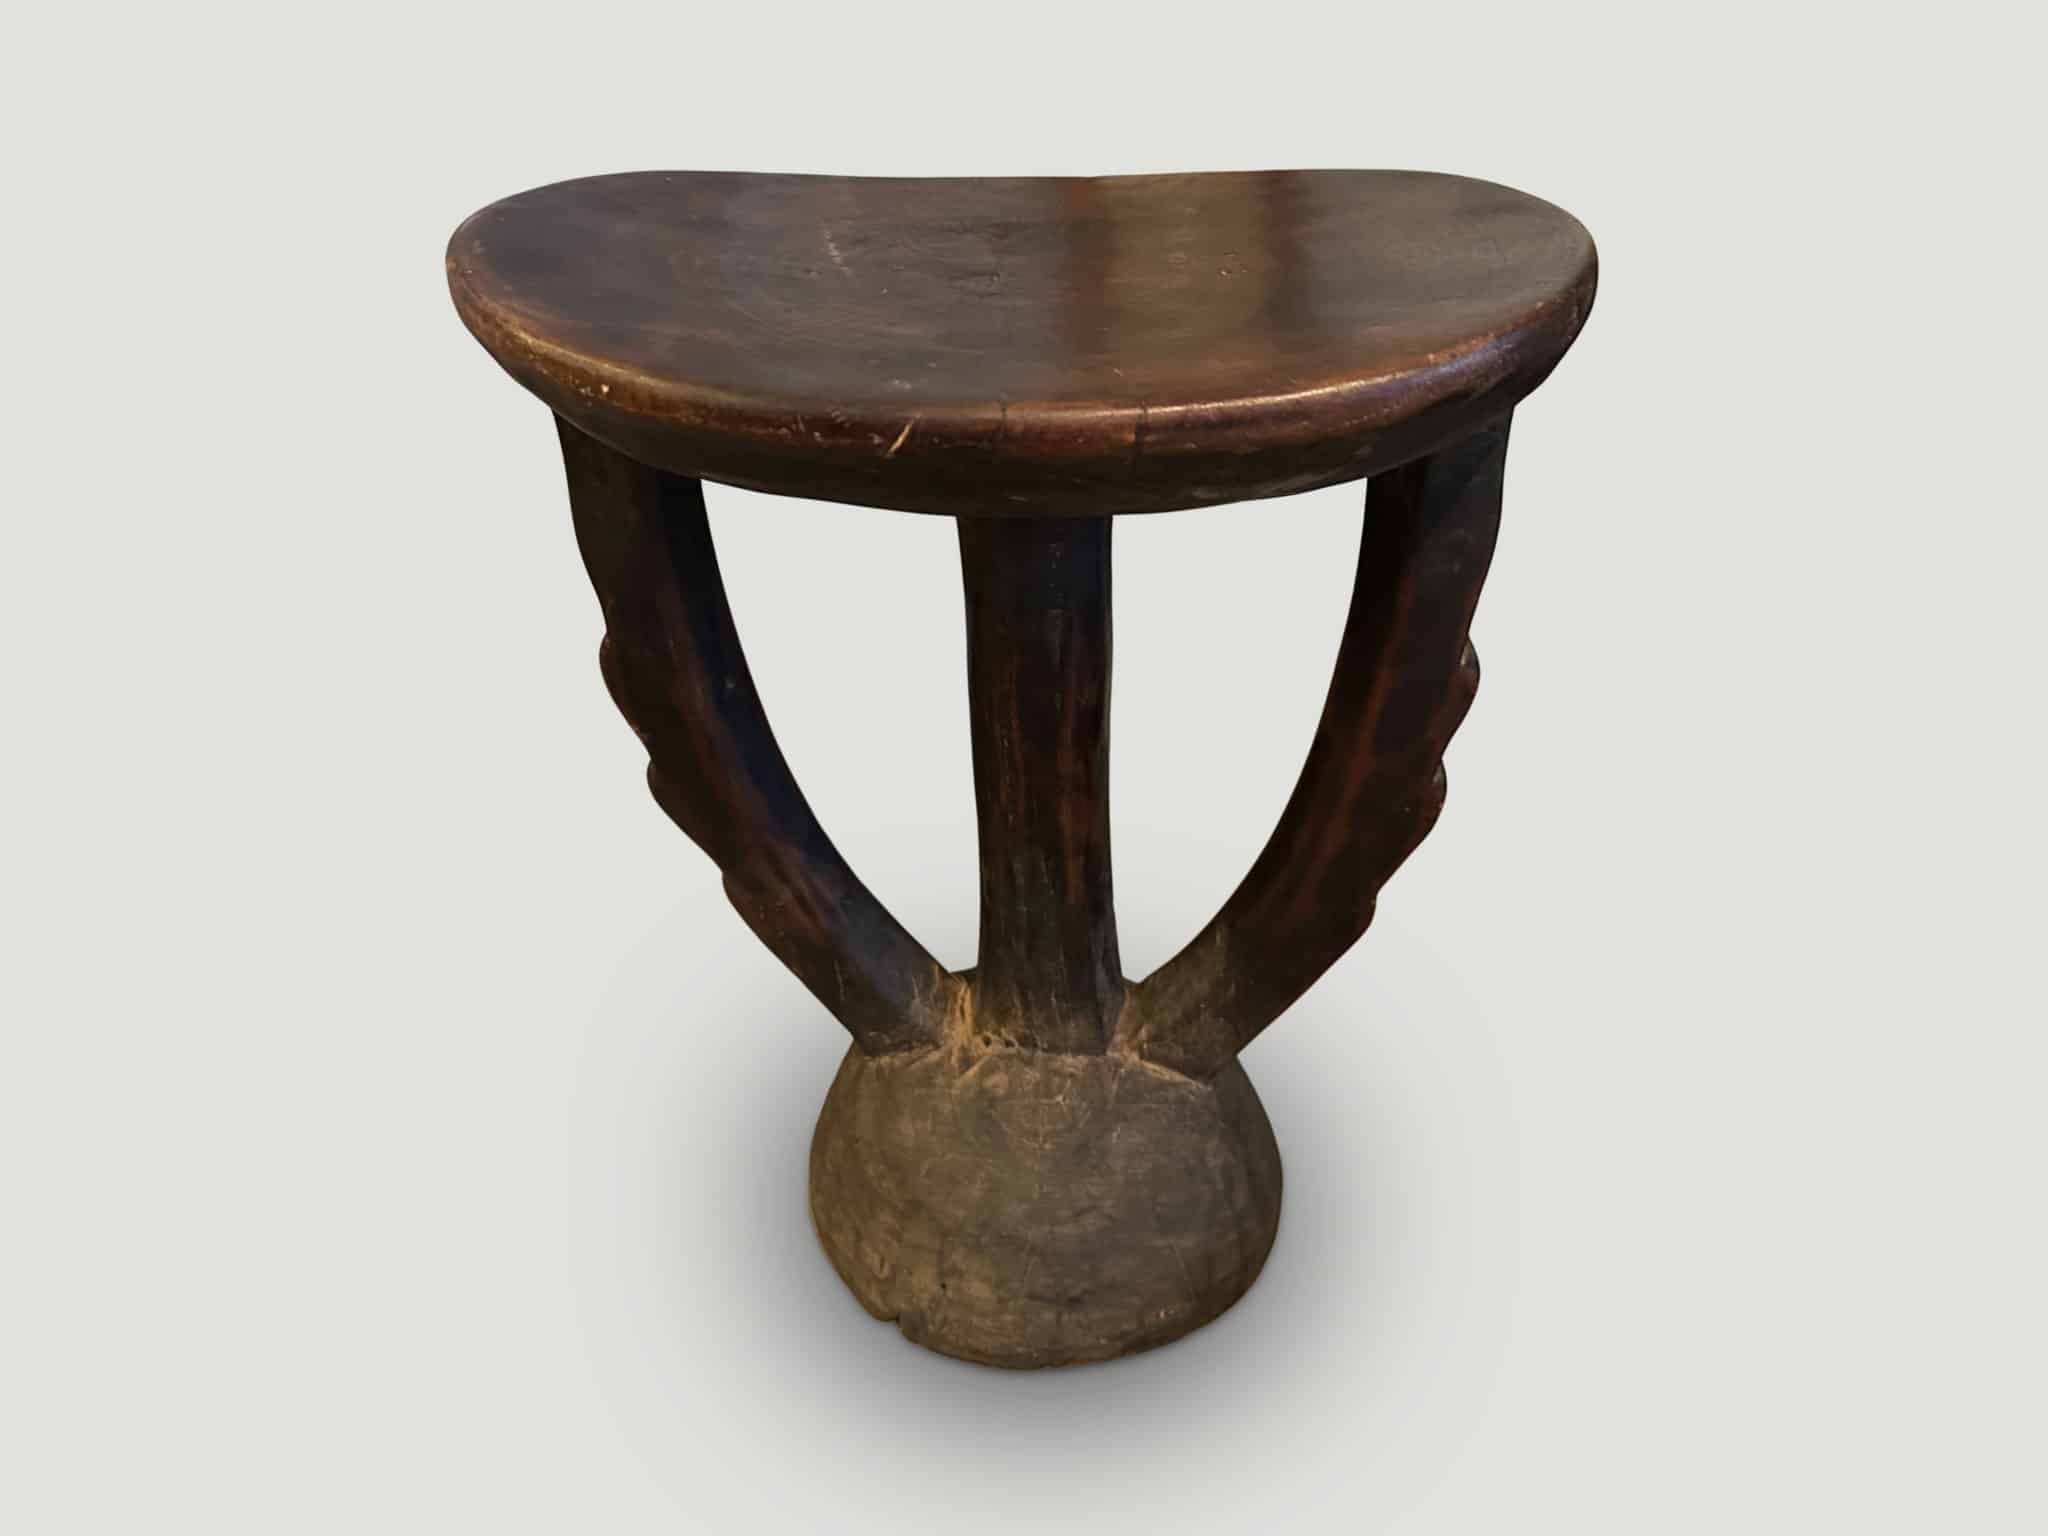 RARE ANTIQUE AFRICAN SCULPTURAL SIDE TABLE